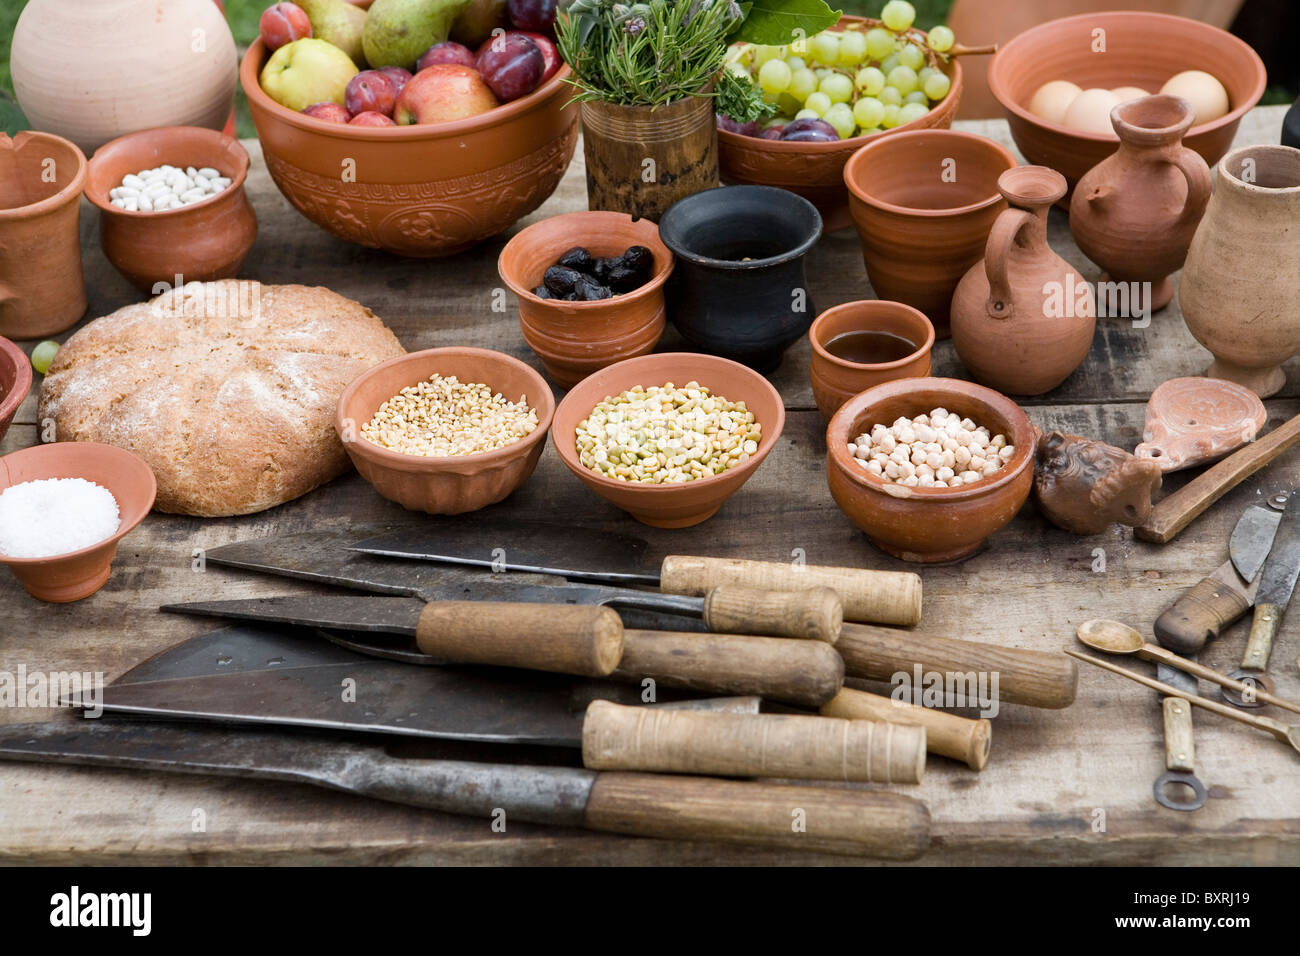 Foods eaten by Roman soldiers, fruit, eggs, grains, and bread in terracotta pots and jugs with knives and spoons on table Stock Photo